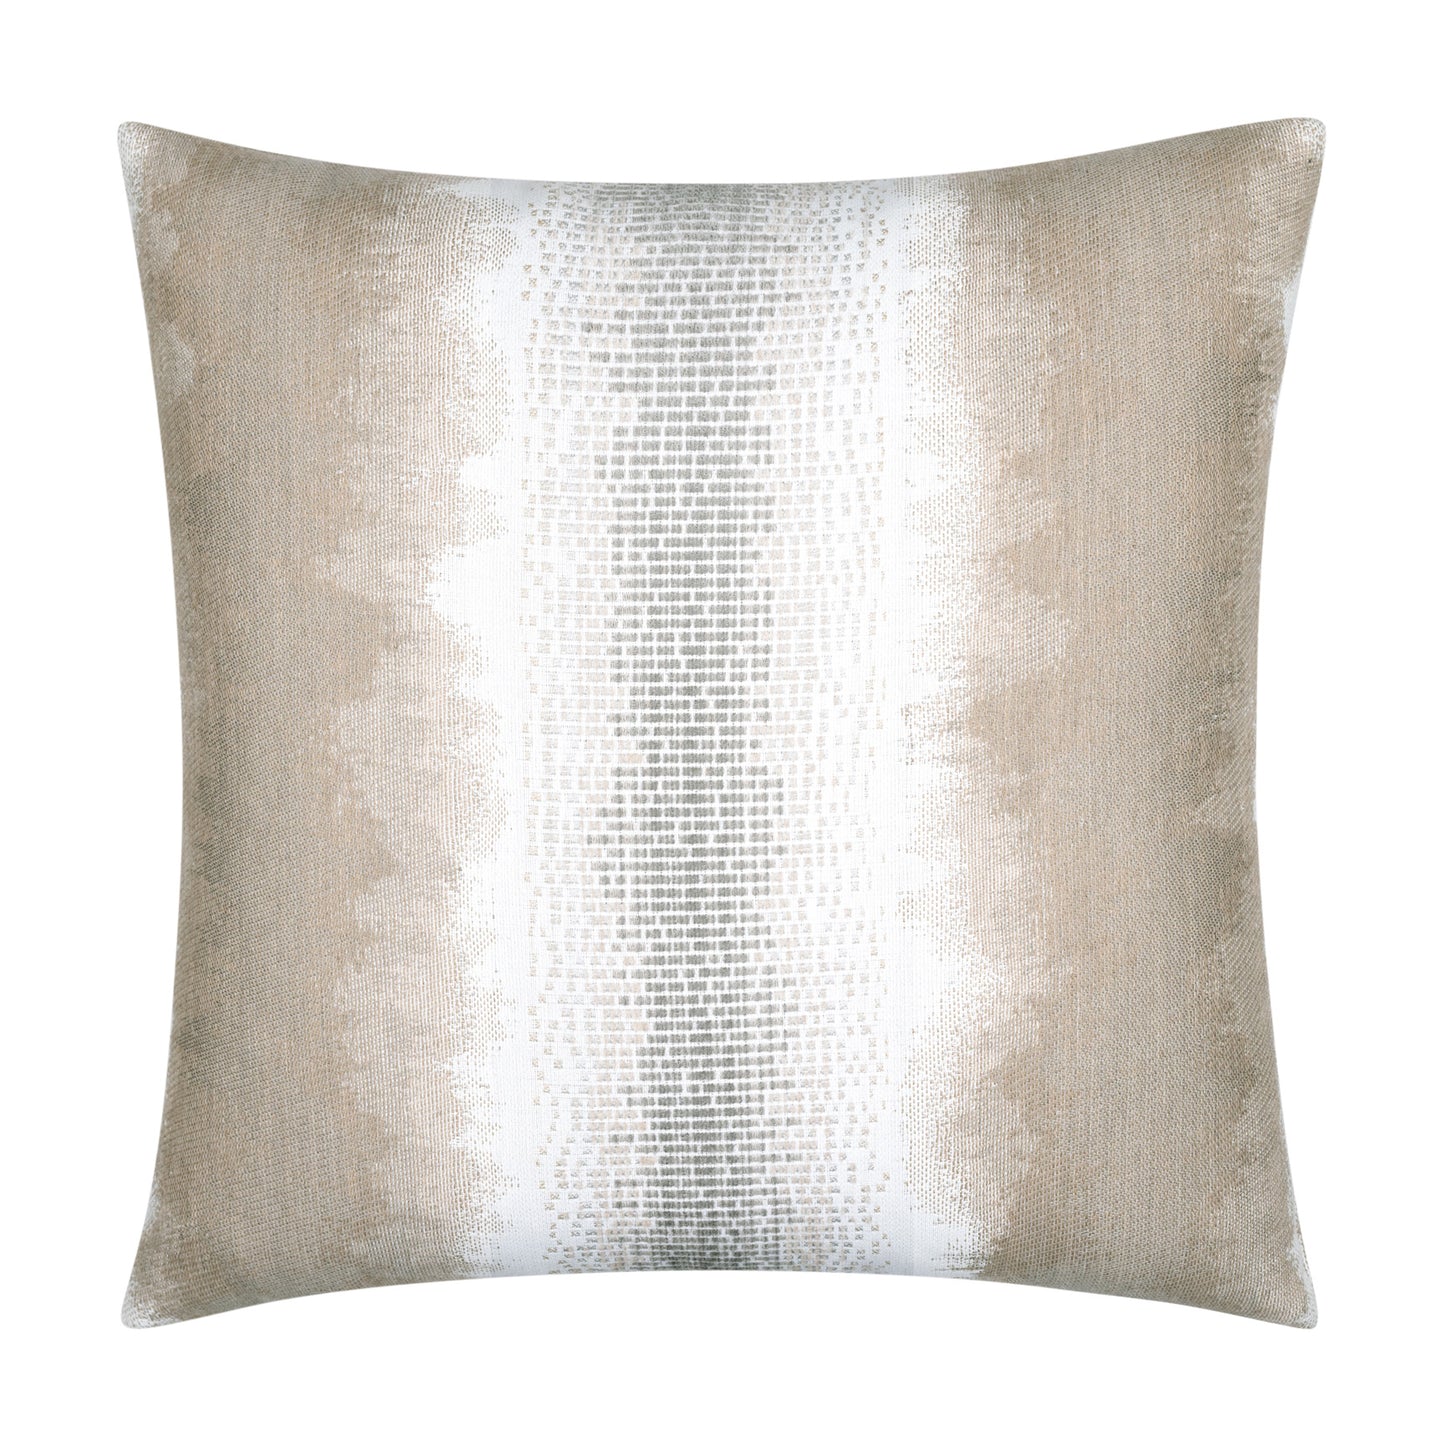 20" Square Elaine Smith Pillow  Resilience Sand, image 1